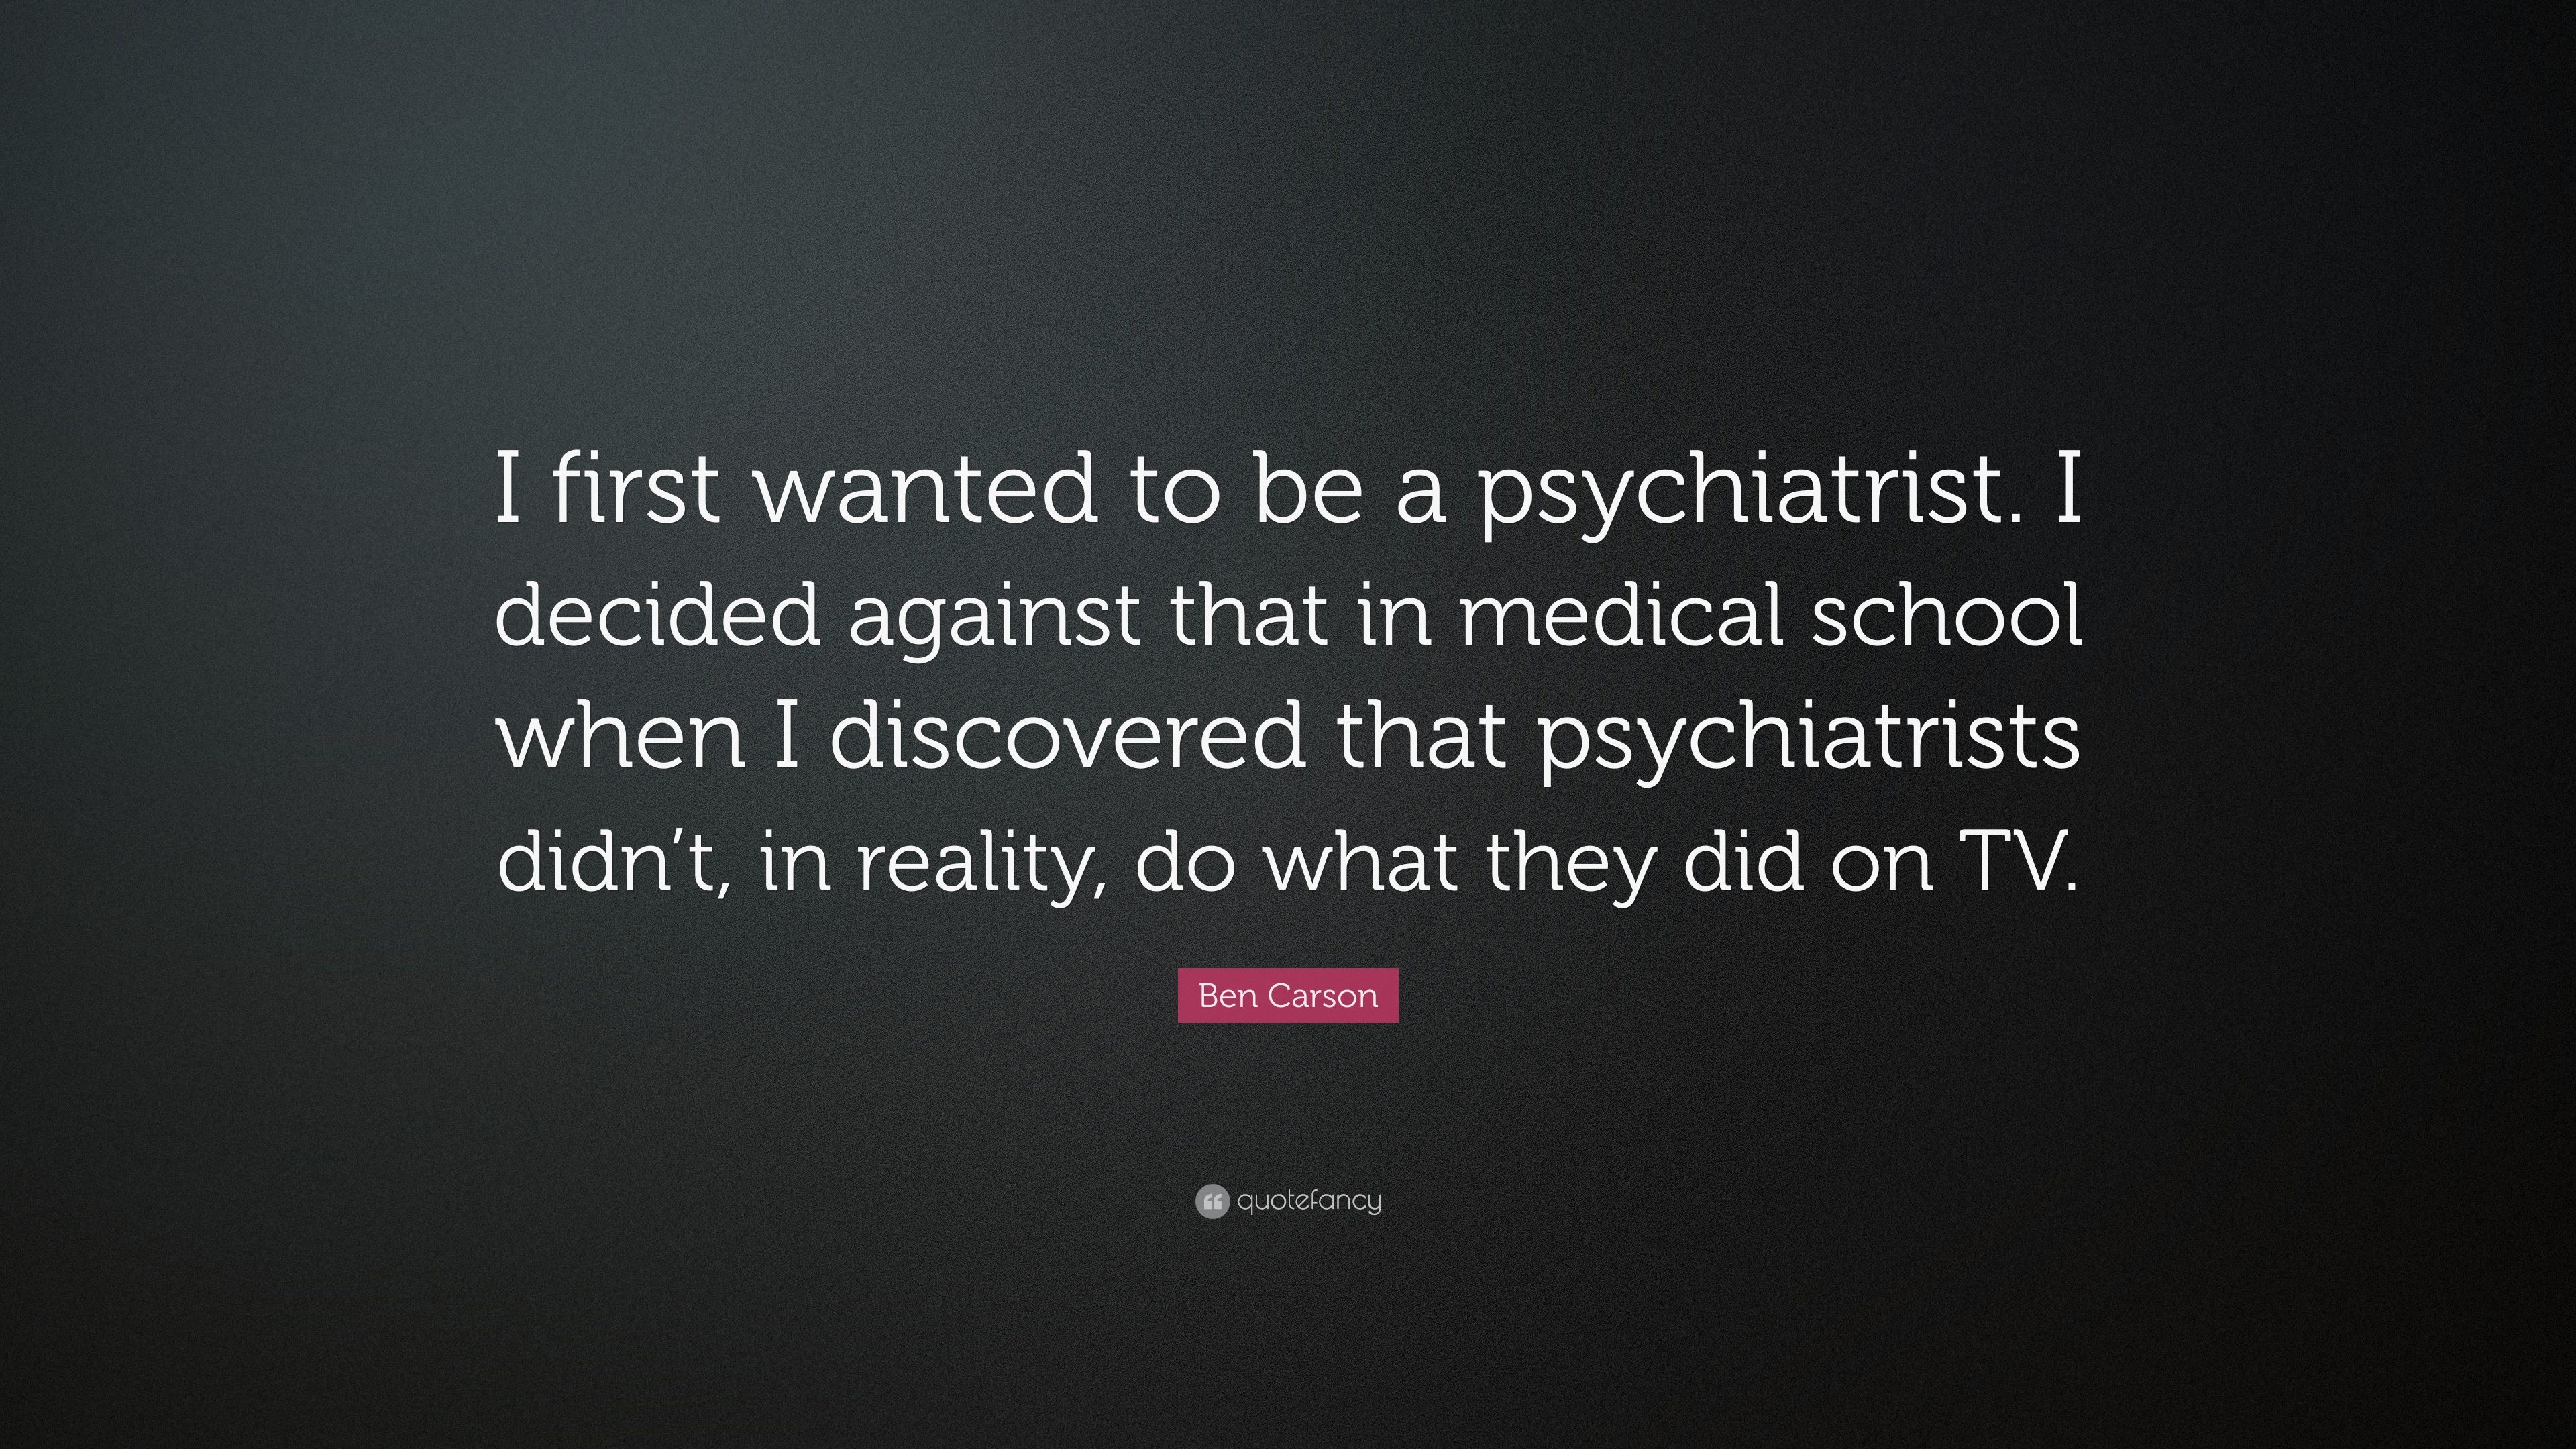 Ben Carson Quote: “I first wanted to be a psychiatrist. I decided against that in medical school when I discovered that psychiatrists didn'.”